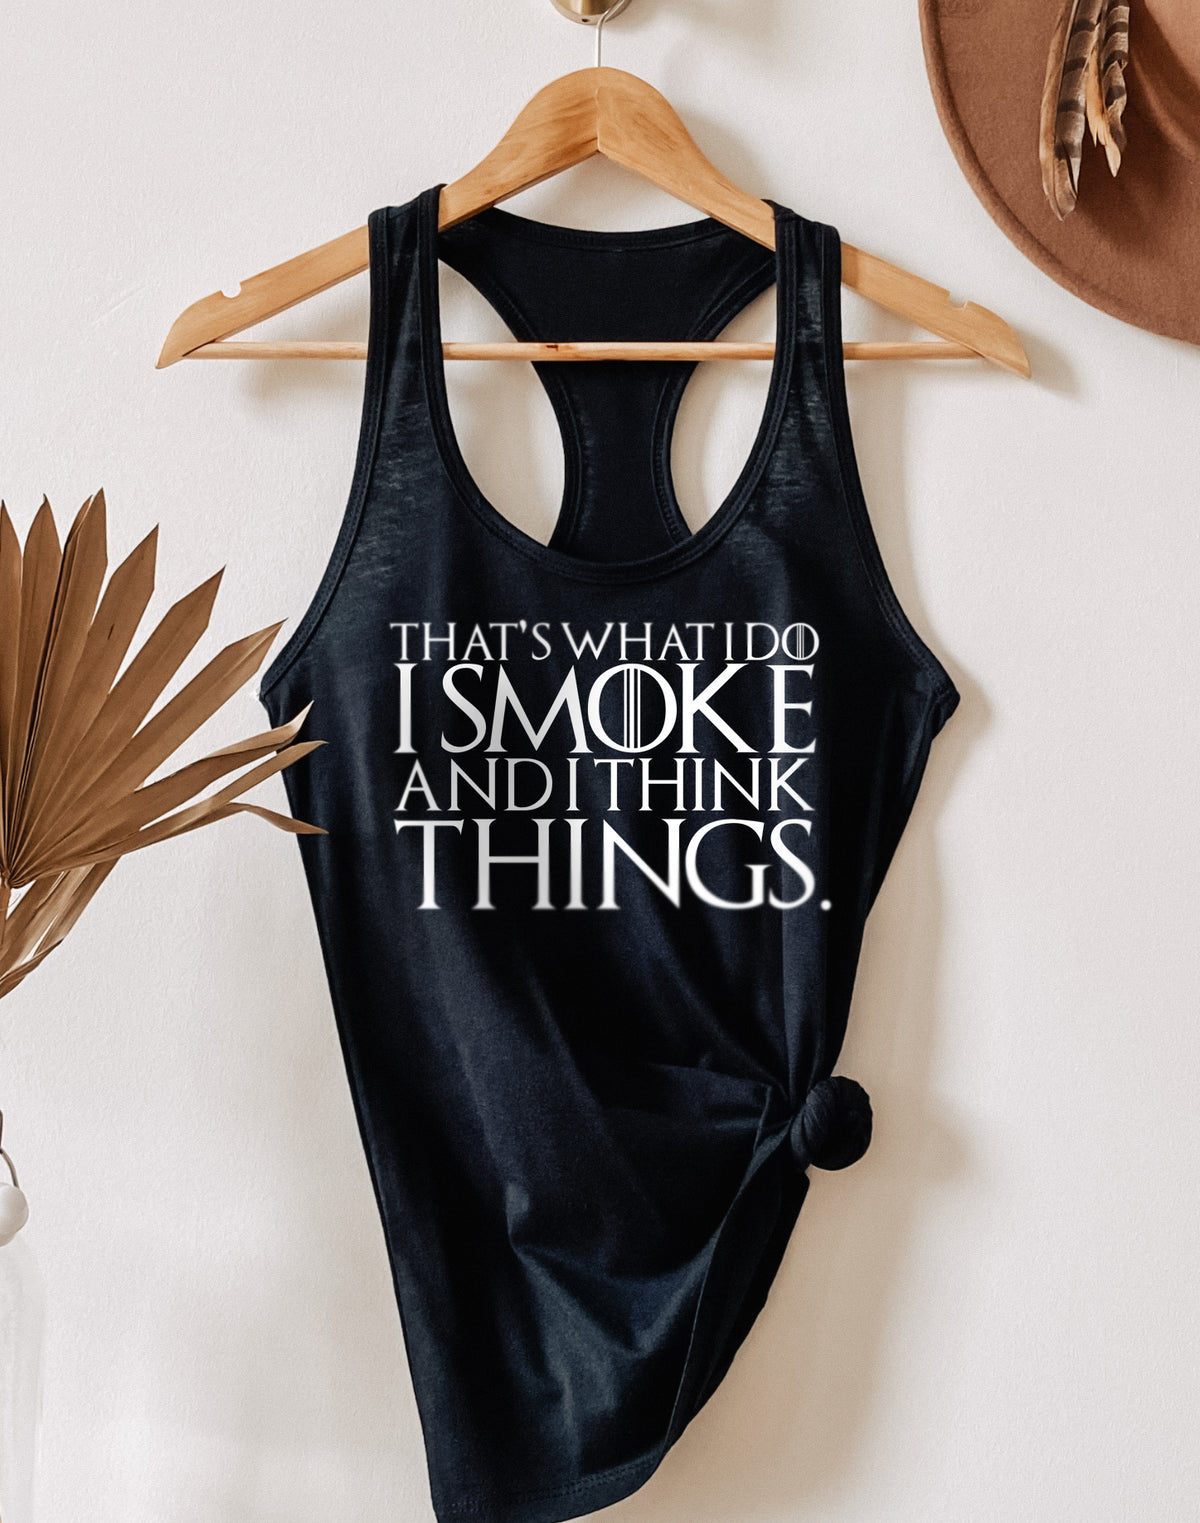 weed game of thrones tank top - HighCiti